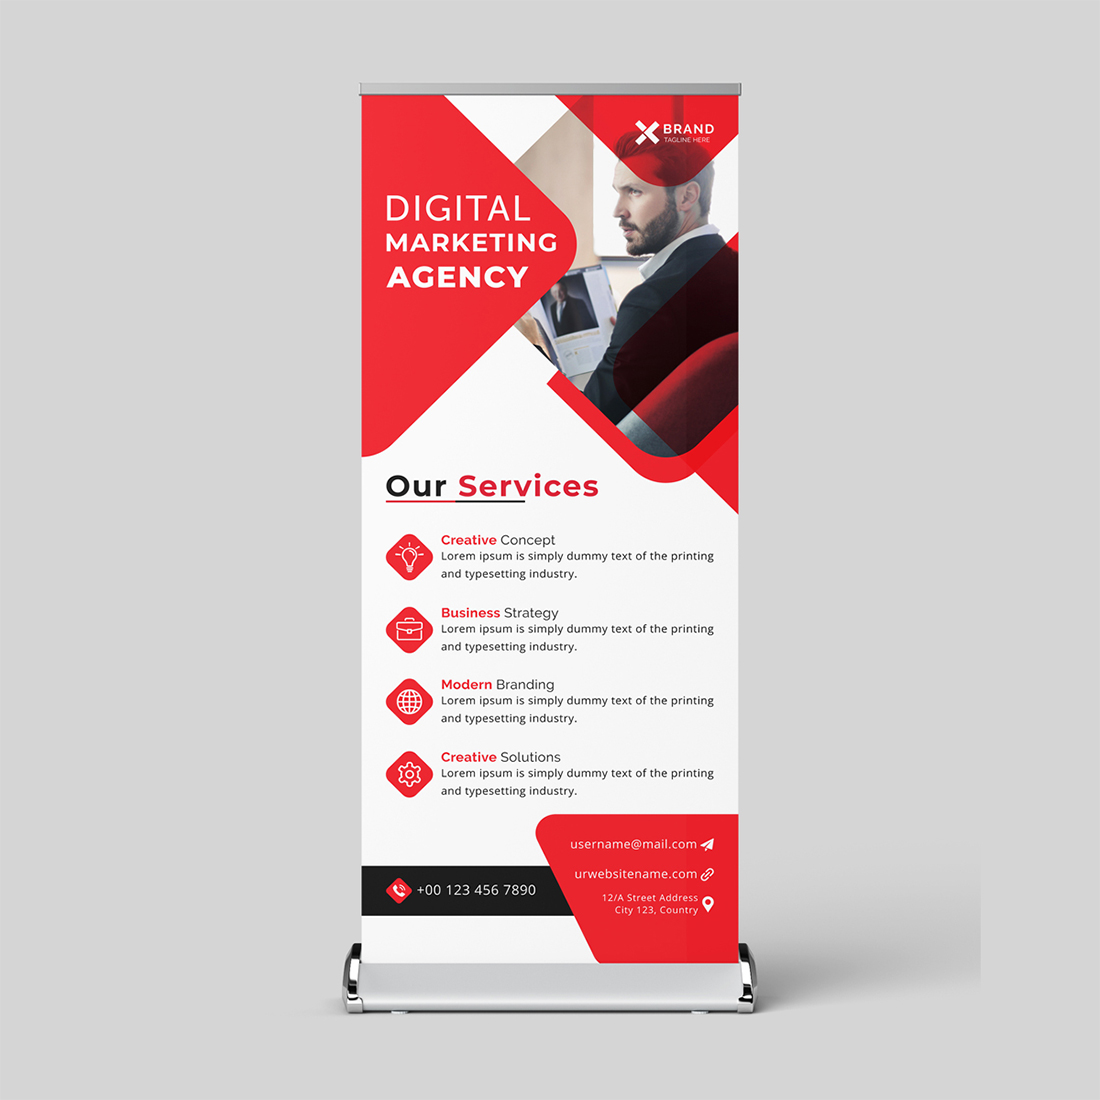 Digital Marketing Agency Roll Up Banner Design Template preview image.